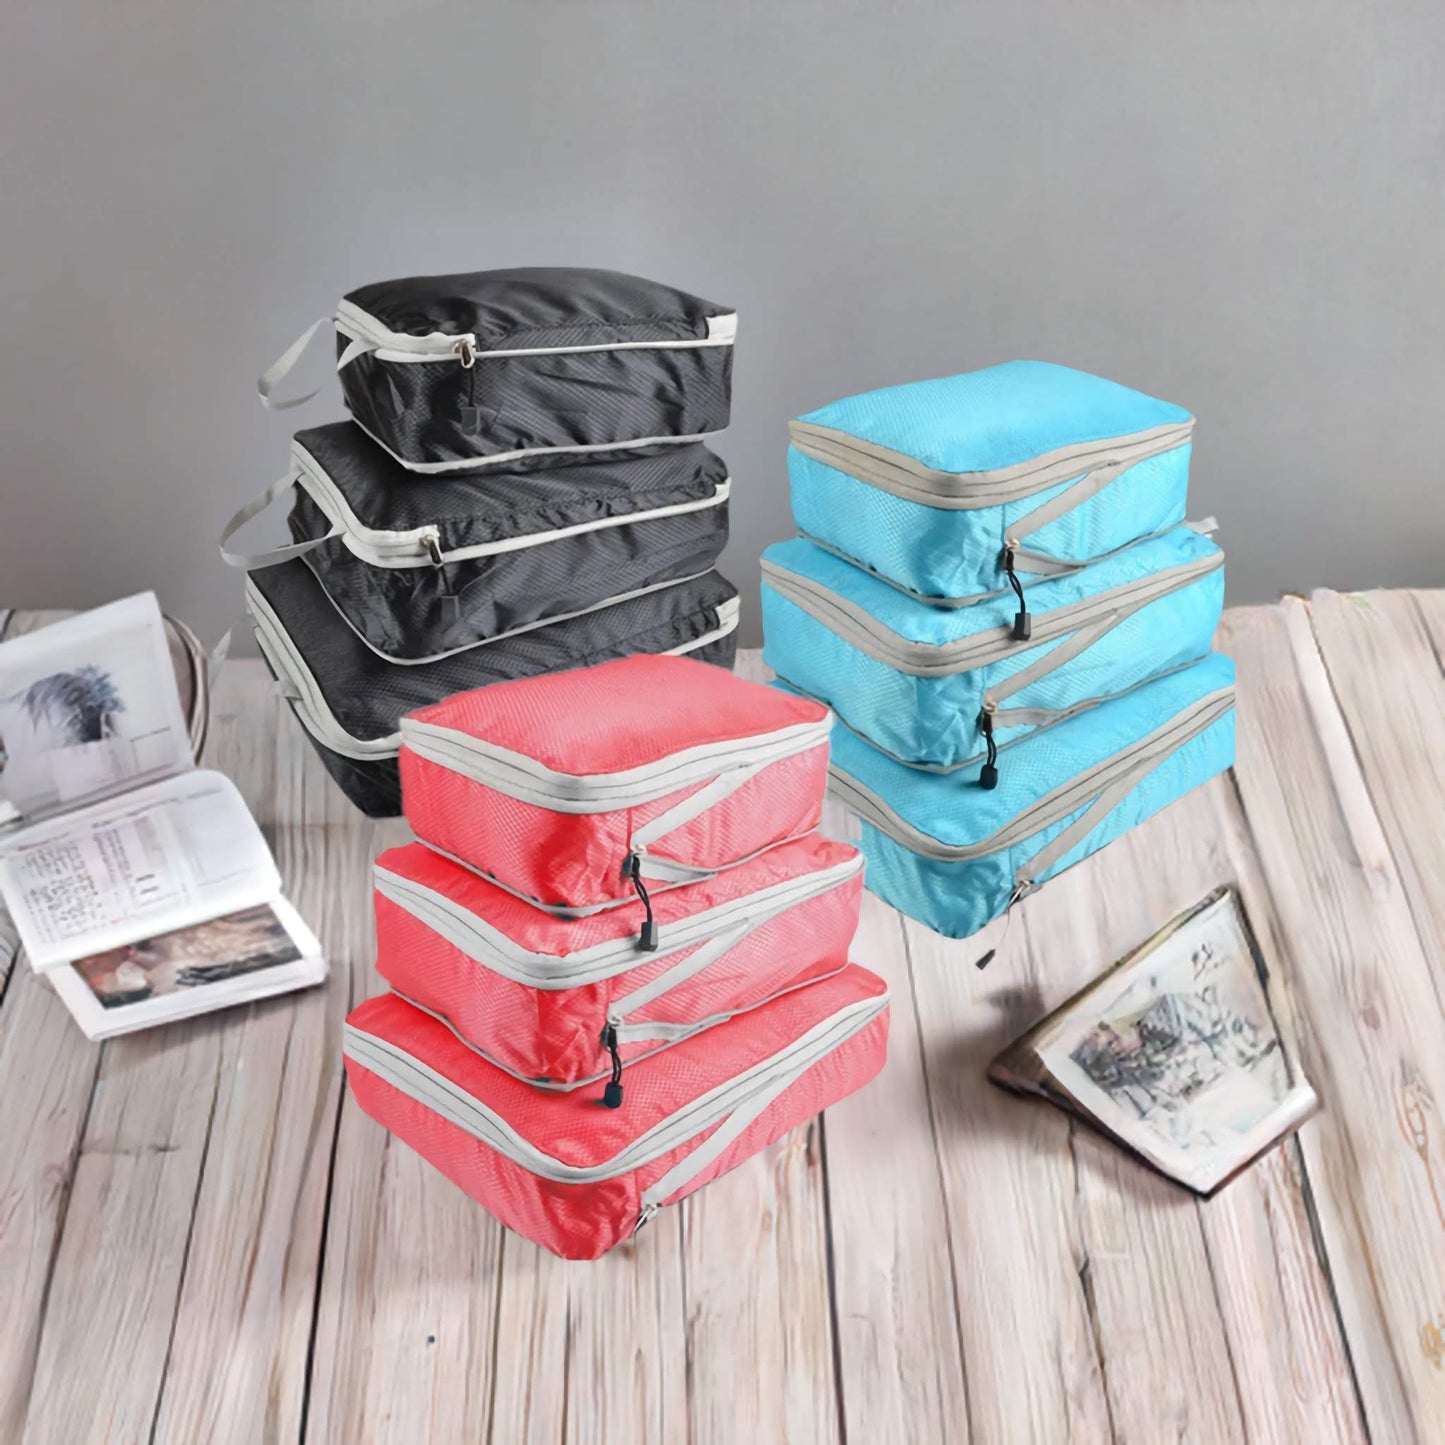 3 pieces Compressible Packing Travel Storage Bag Cubes Waterproof Suitcase Nylon Portable With Handbag Luggage Organizer